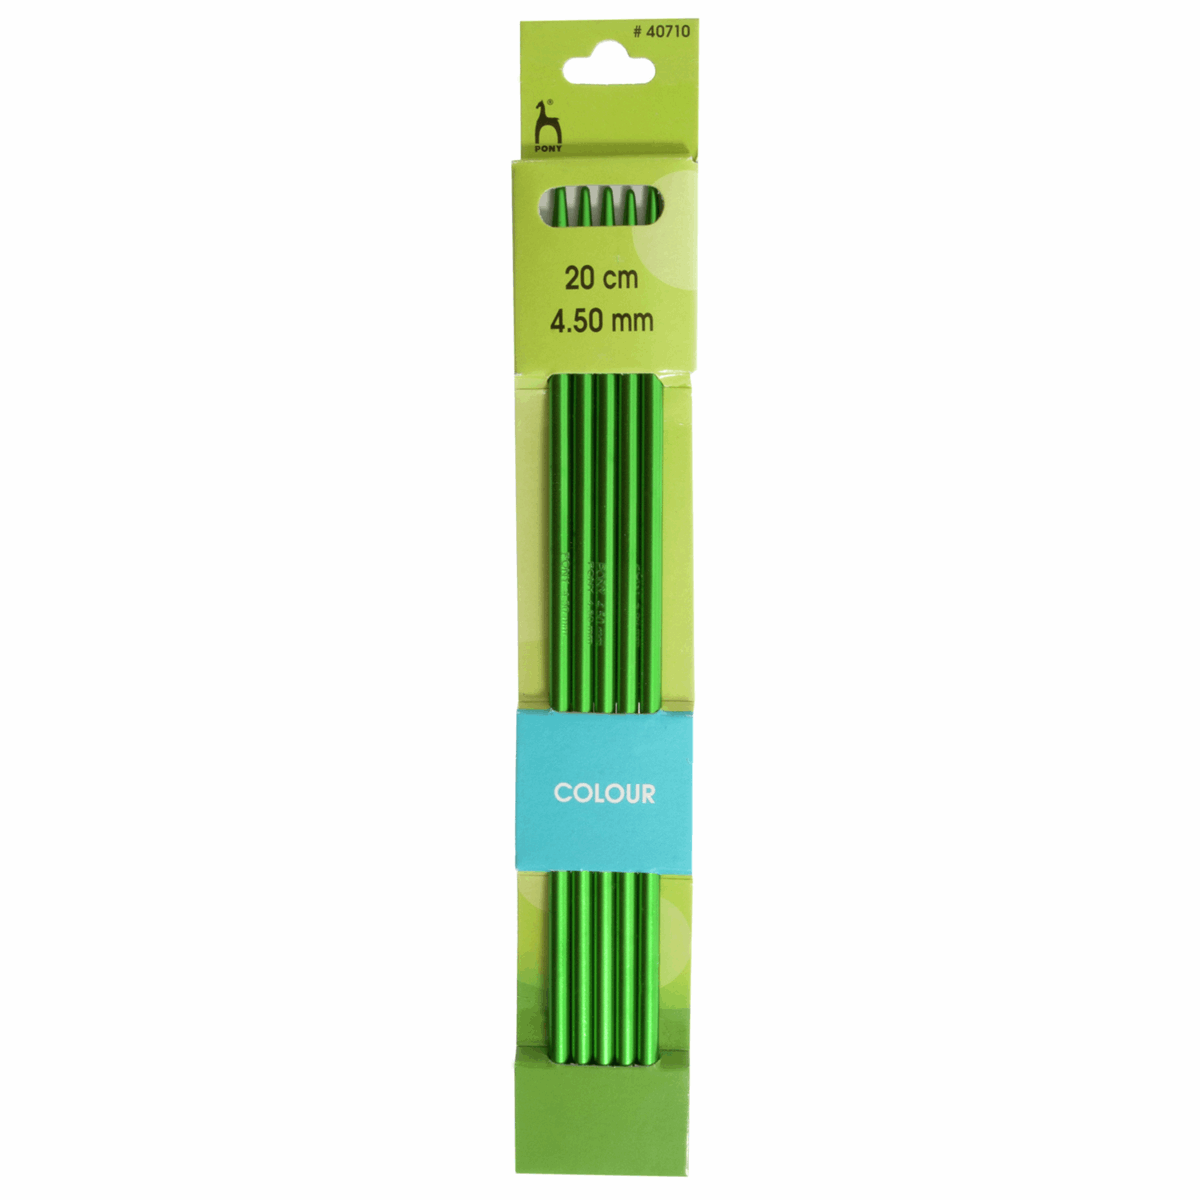 PONY Double-Ended Coloured Knitting Pins - 20cm x 4.5mm (Set of 5)